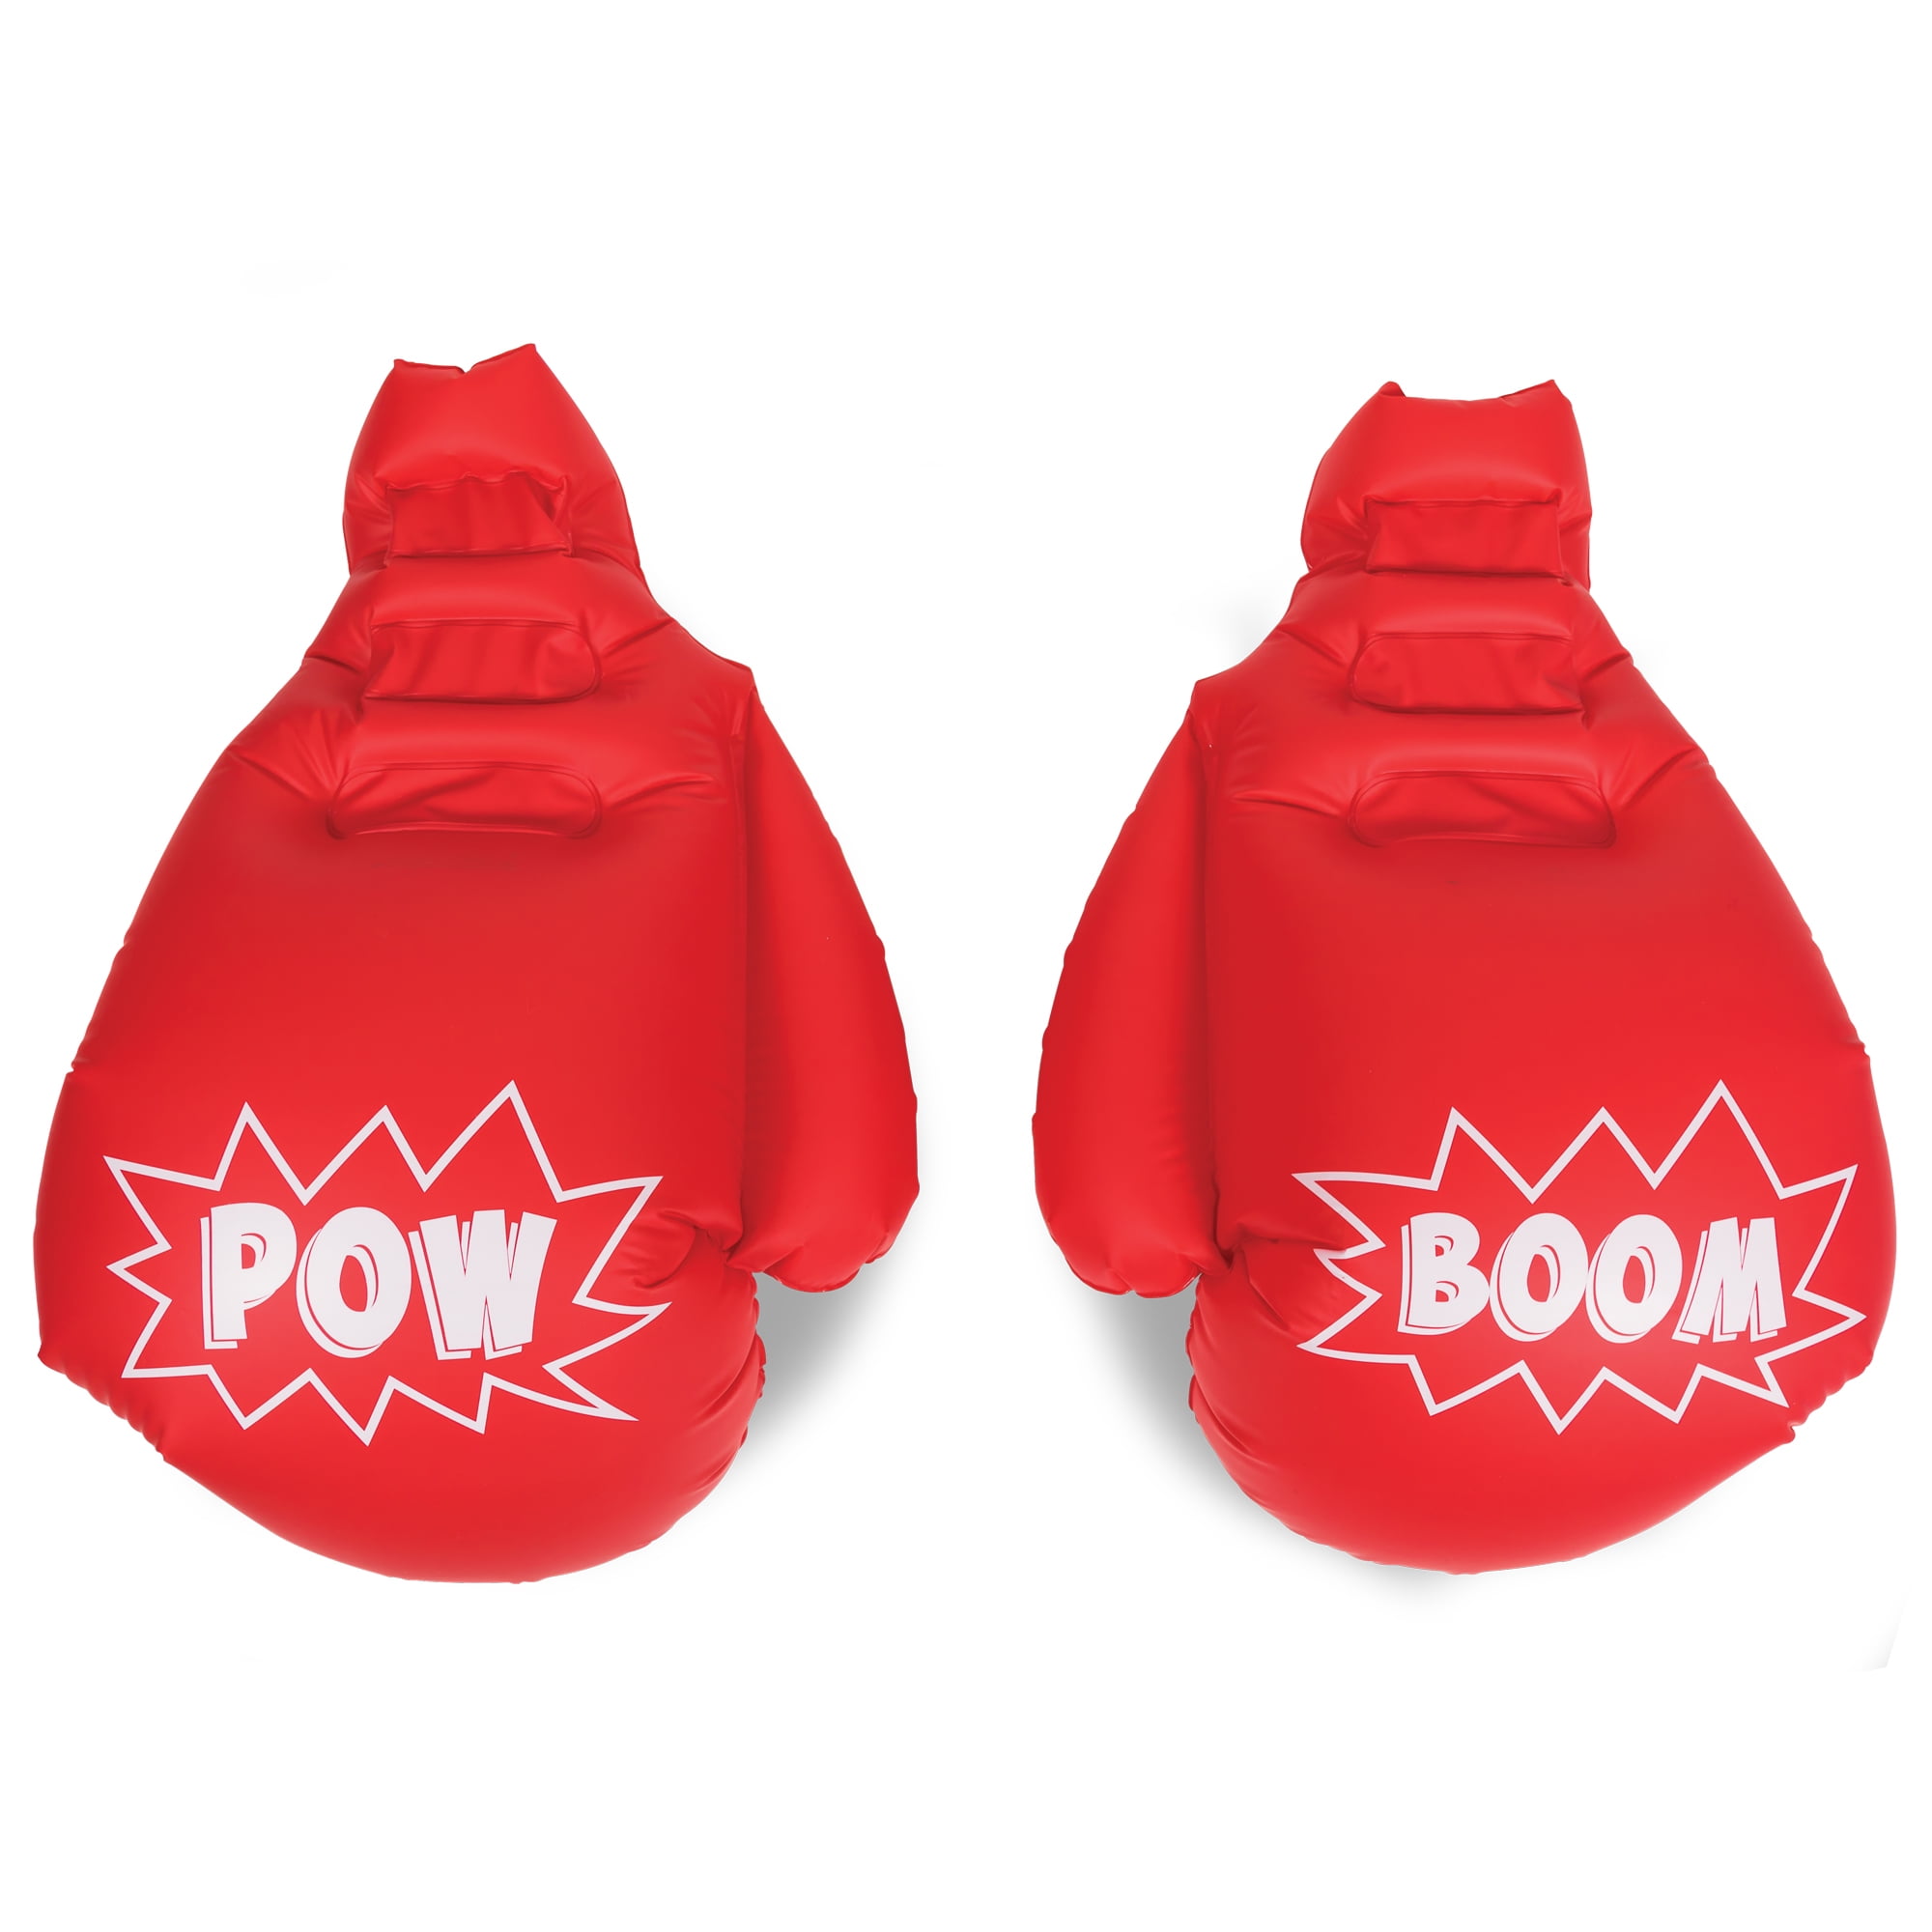 You Can Put Them On You Get The Pair Boxing Gloves Blow Up Inflates 